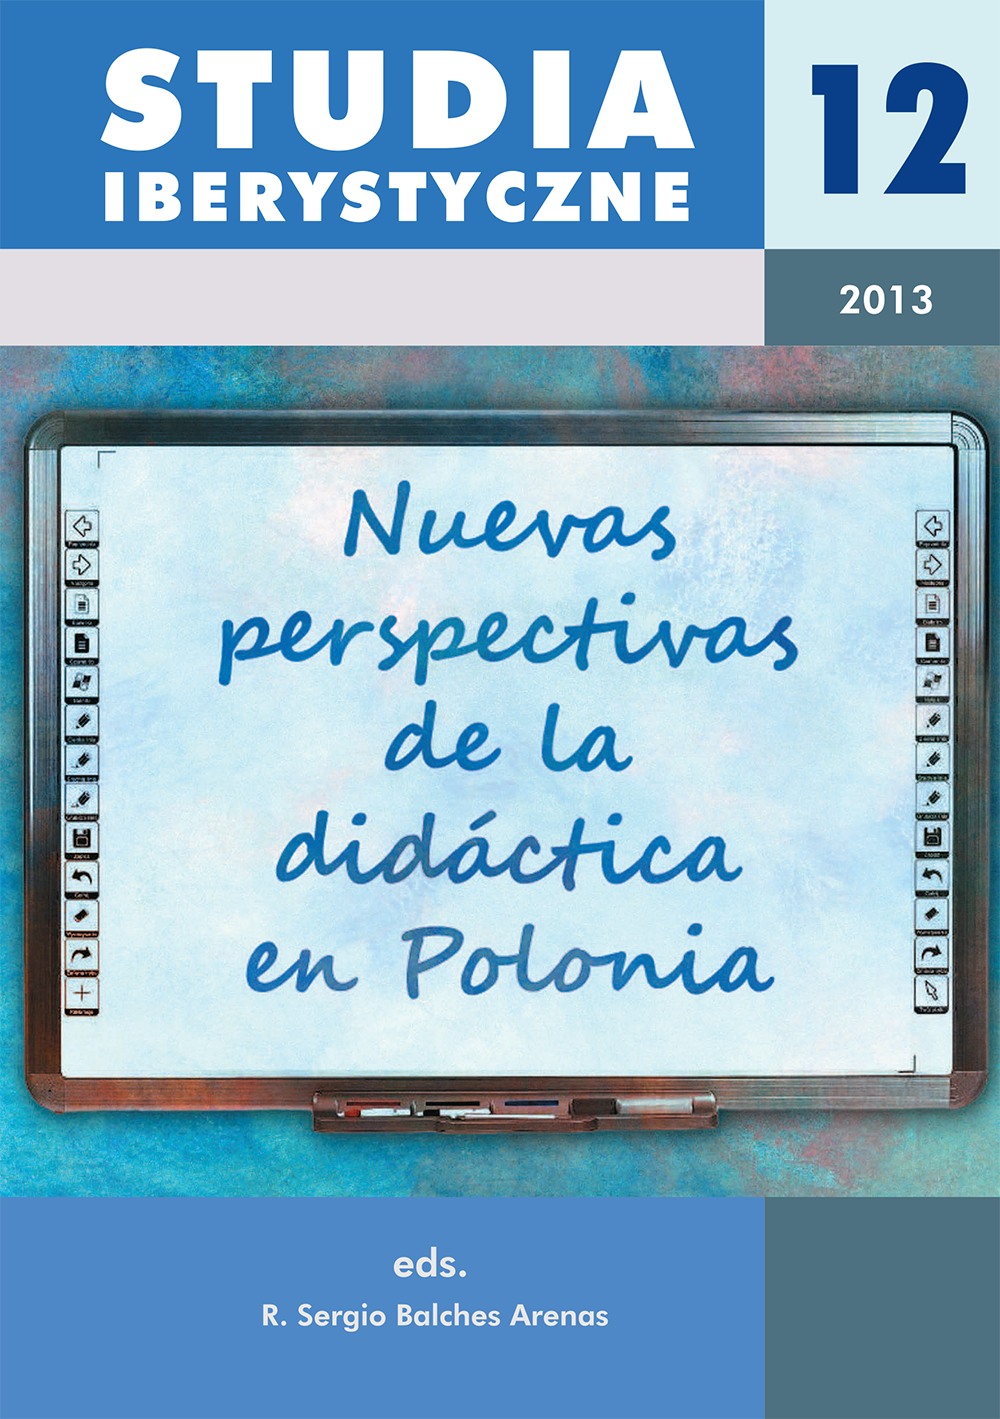 					View Vol. 12 (2013): New Perspectives of Teaching in Poland
				